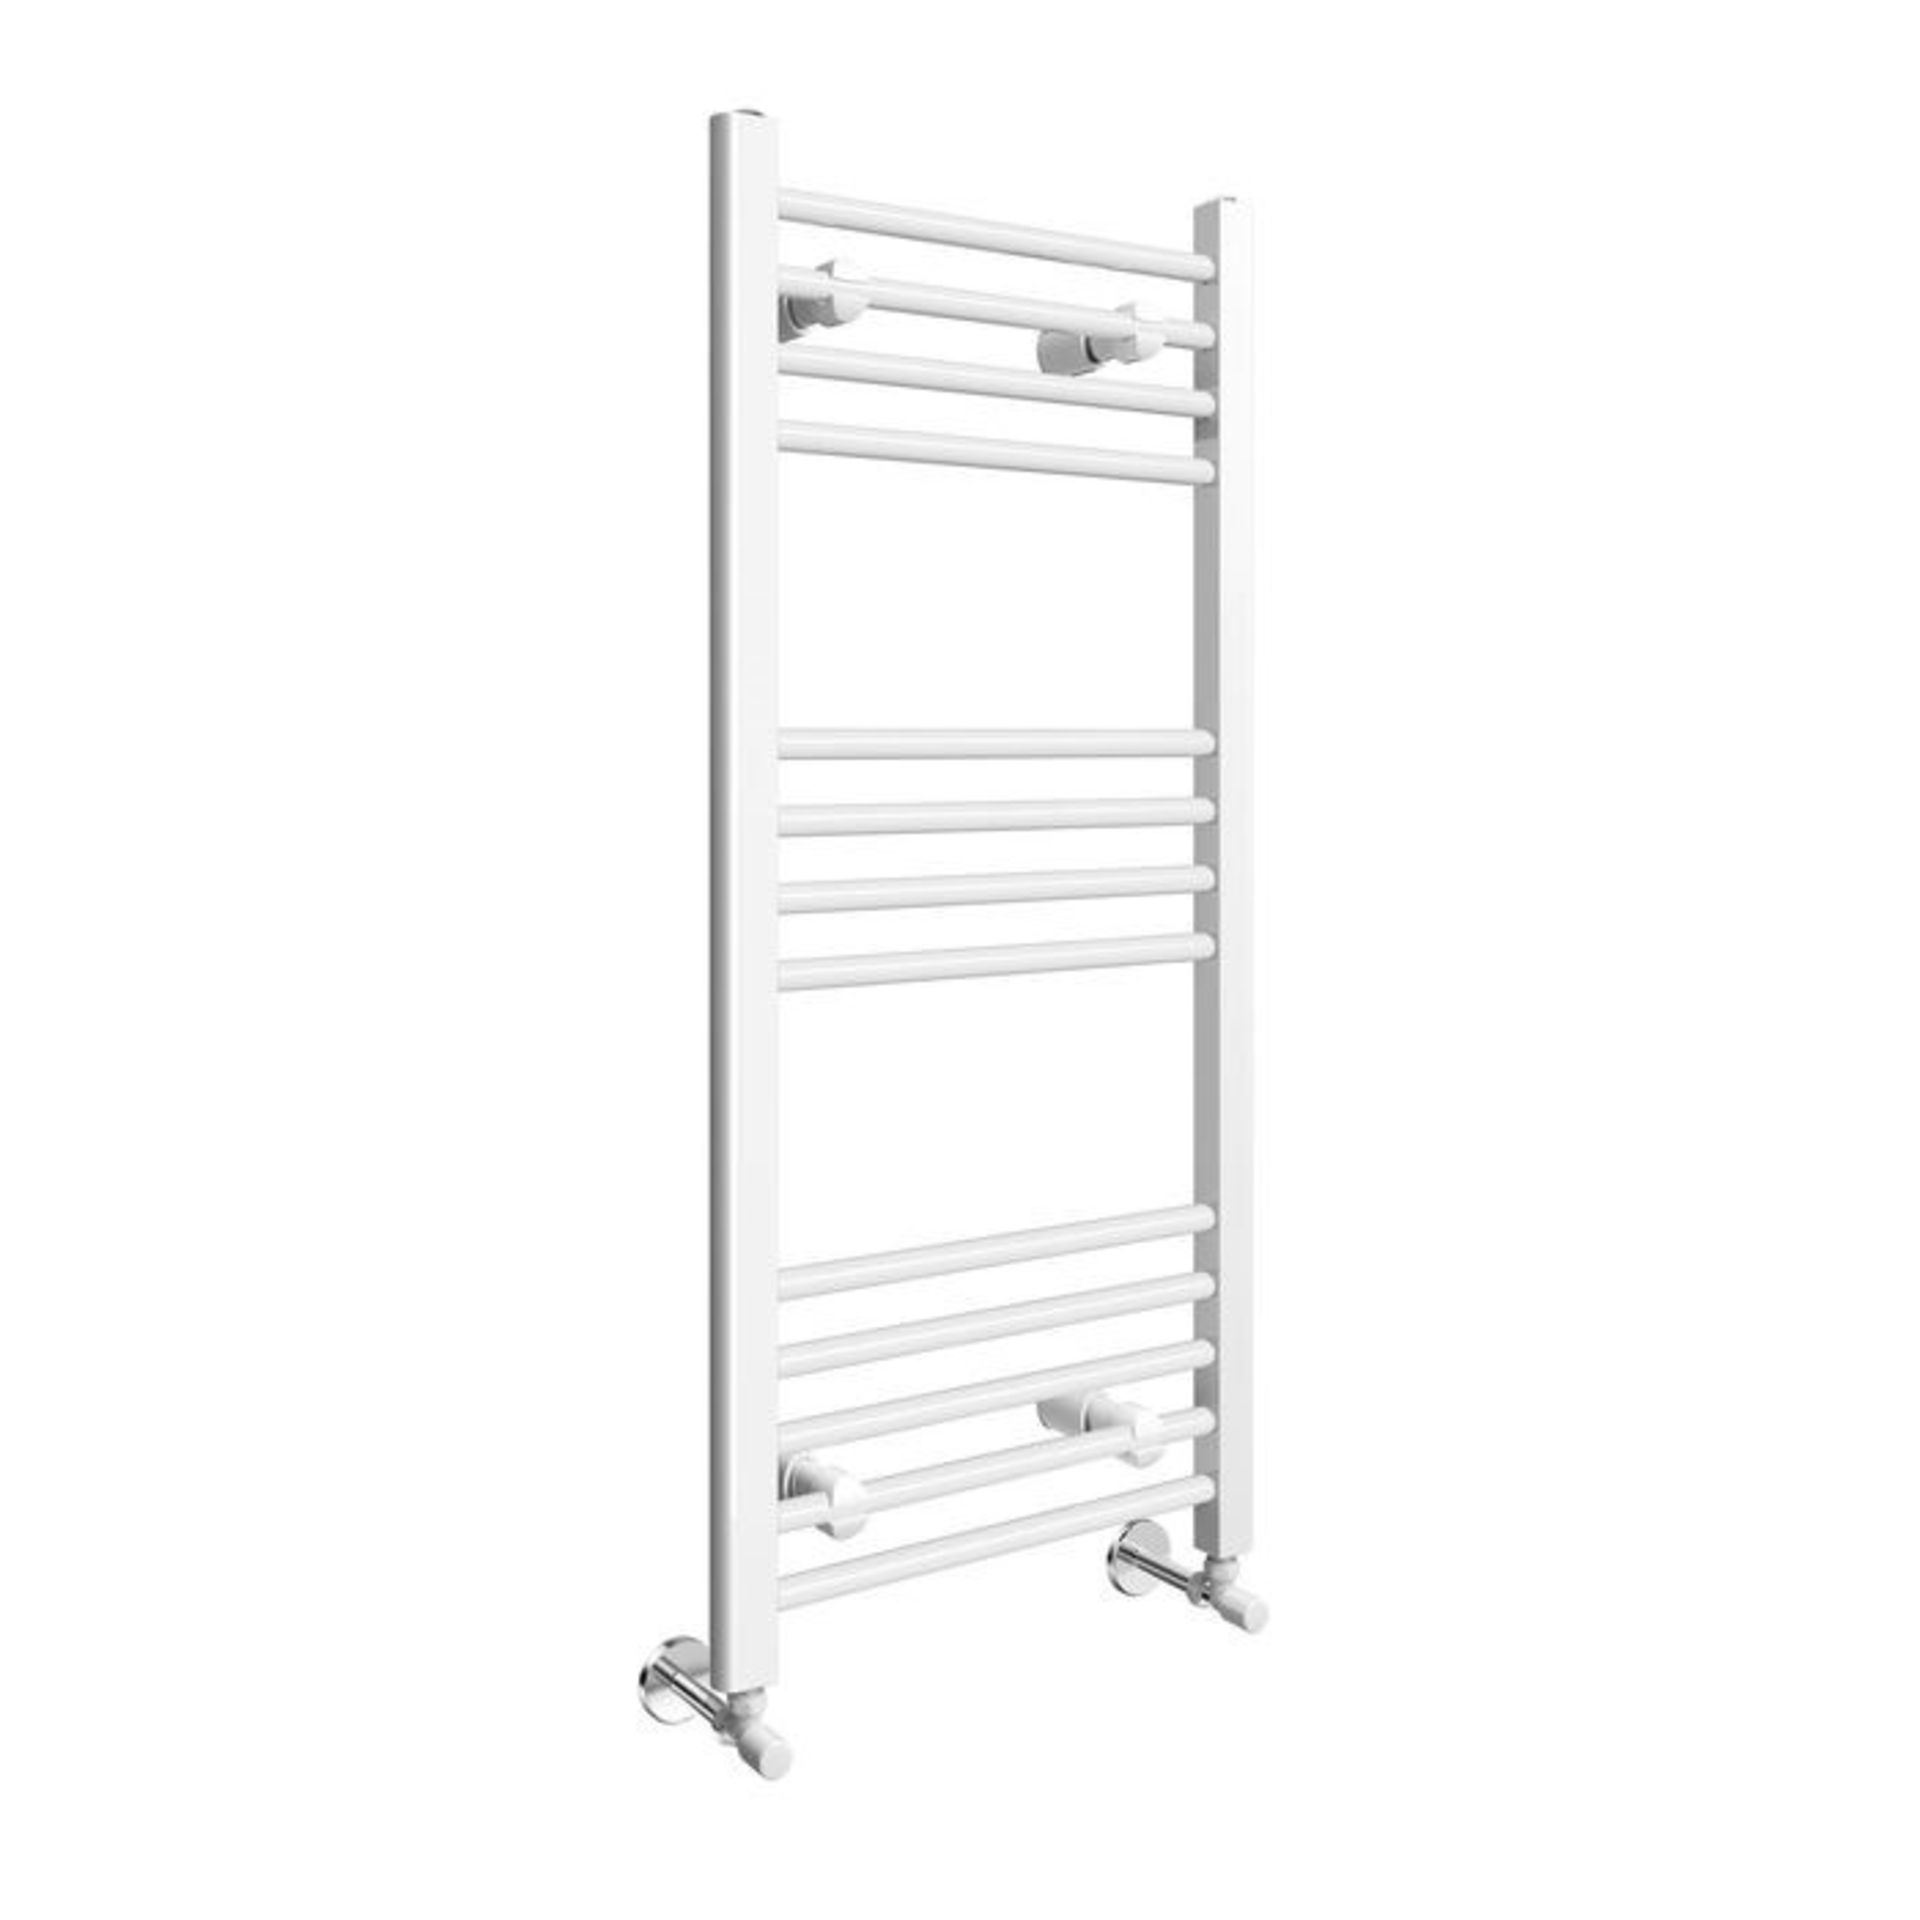 (VD161) 1100x500mm White Basic Towel radiator High gloss White.RRP £165.99.Made from low-carbo... - Bild 3 aus 3